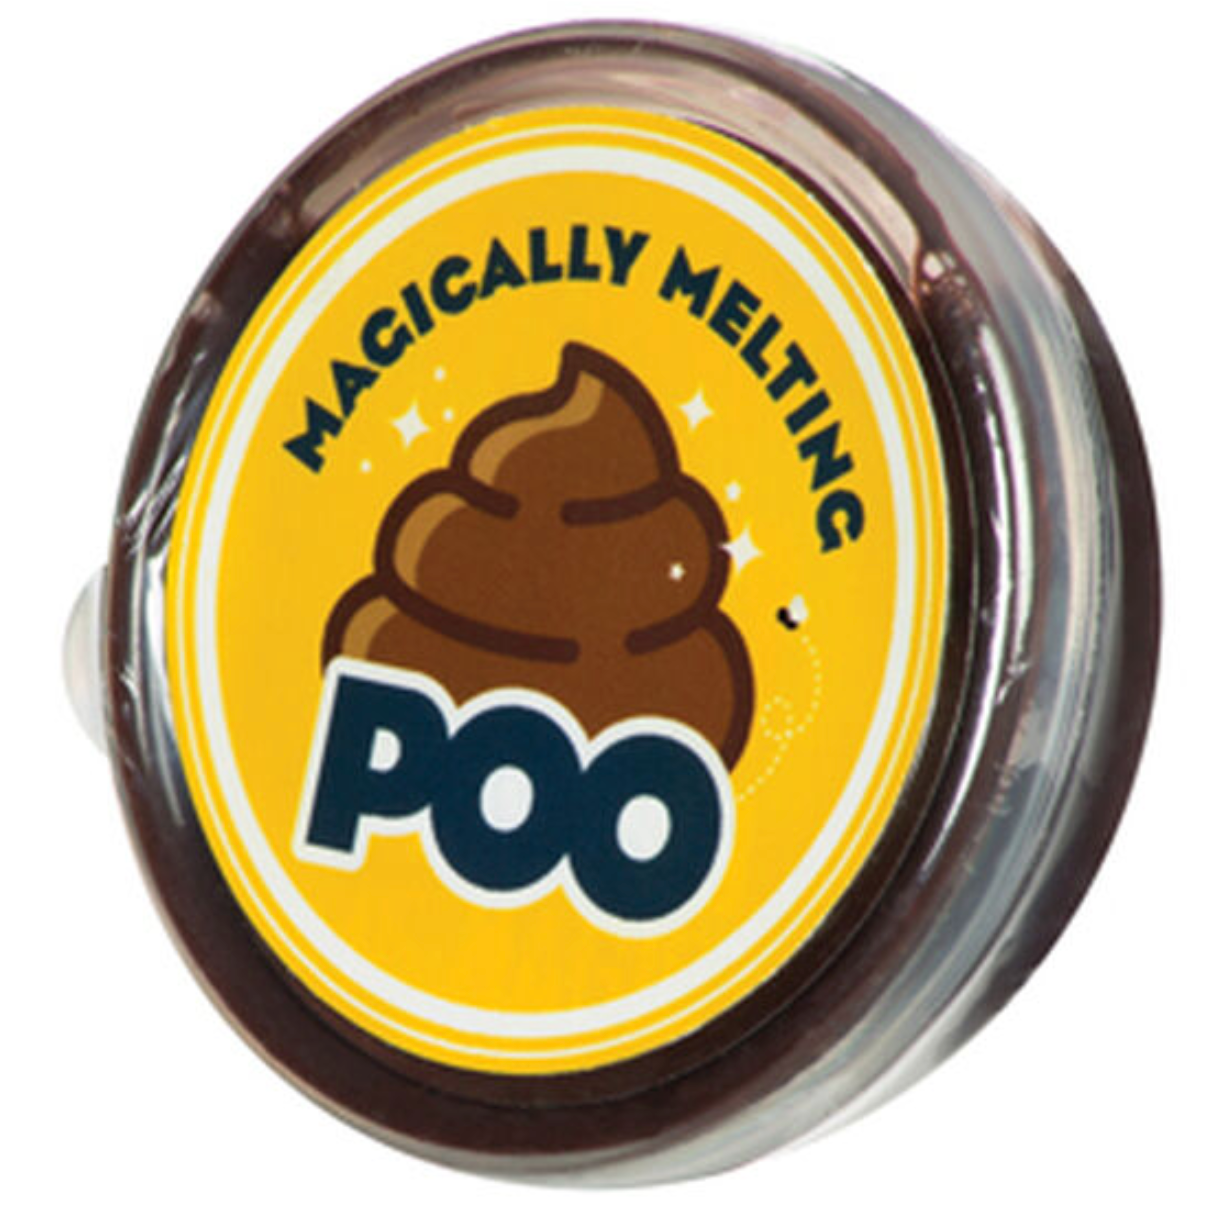 Magically Melting Poo Toy